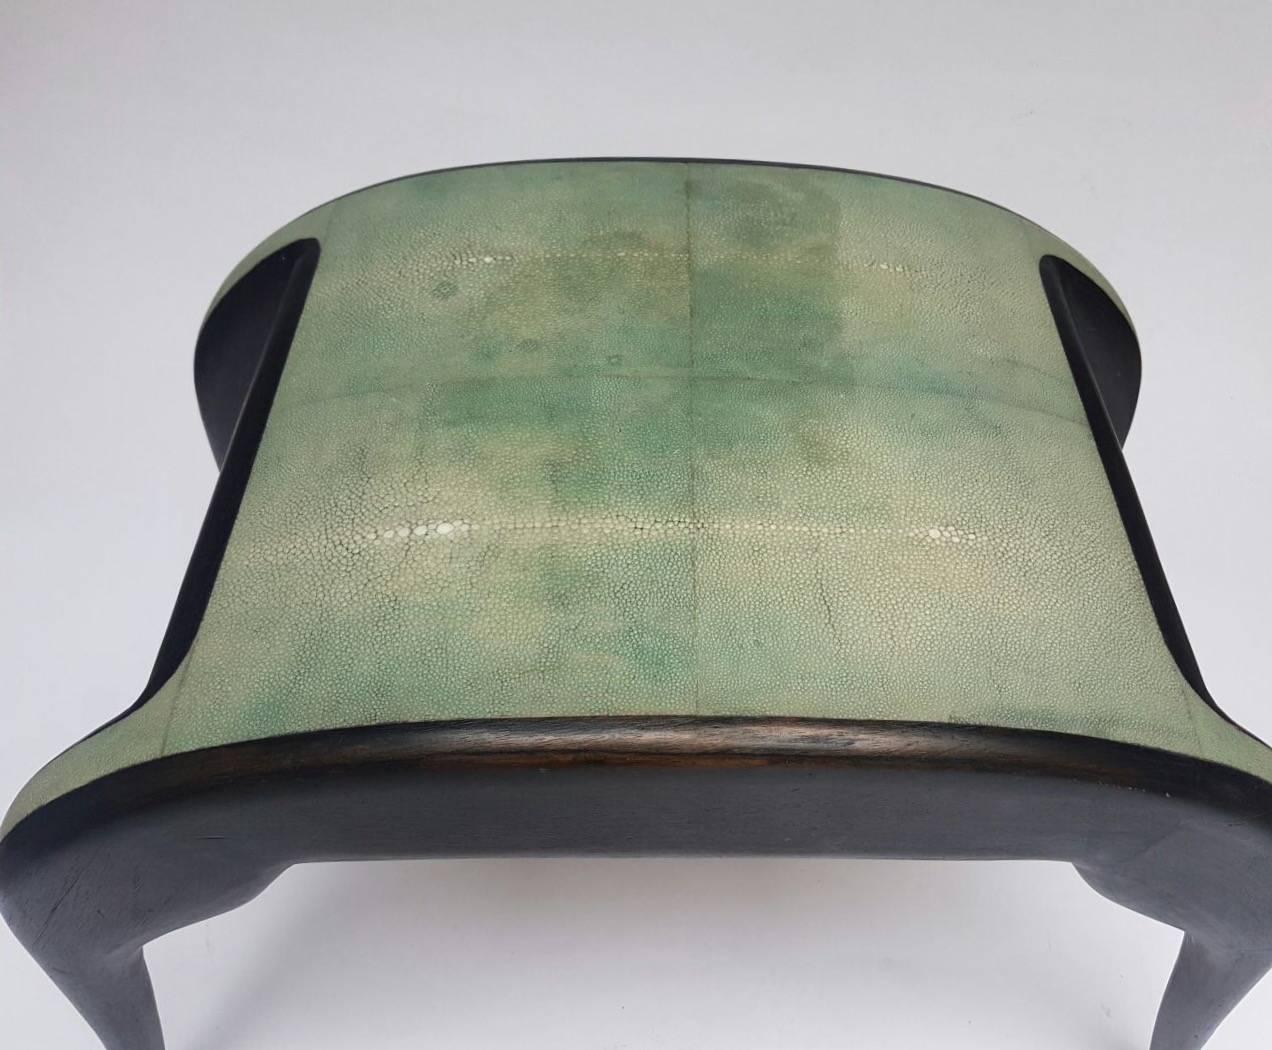 Shagreen and blackened wood's stool by Ria and Yiouri Augousti, circa 1990. Measures: Width 72 cm, height 51 cm, depth 40 cm.